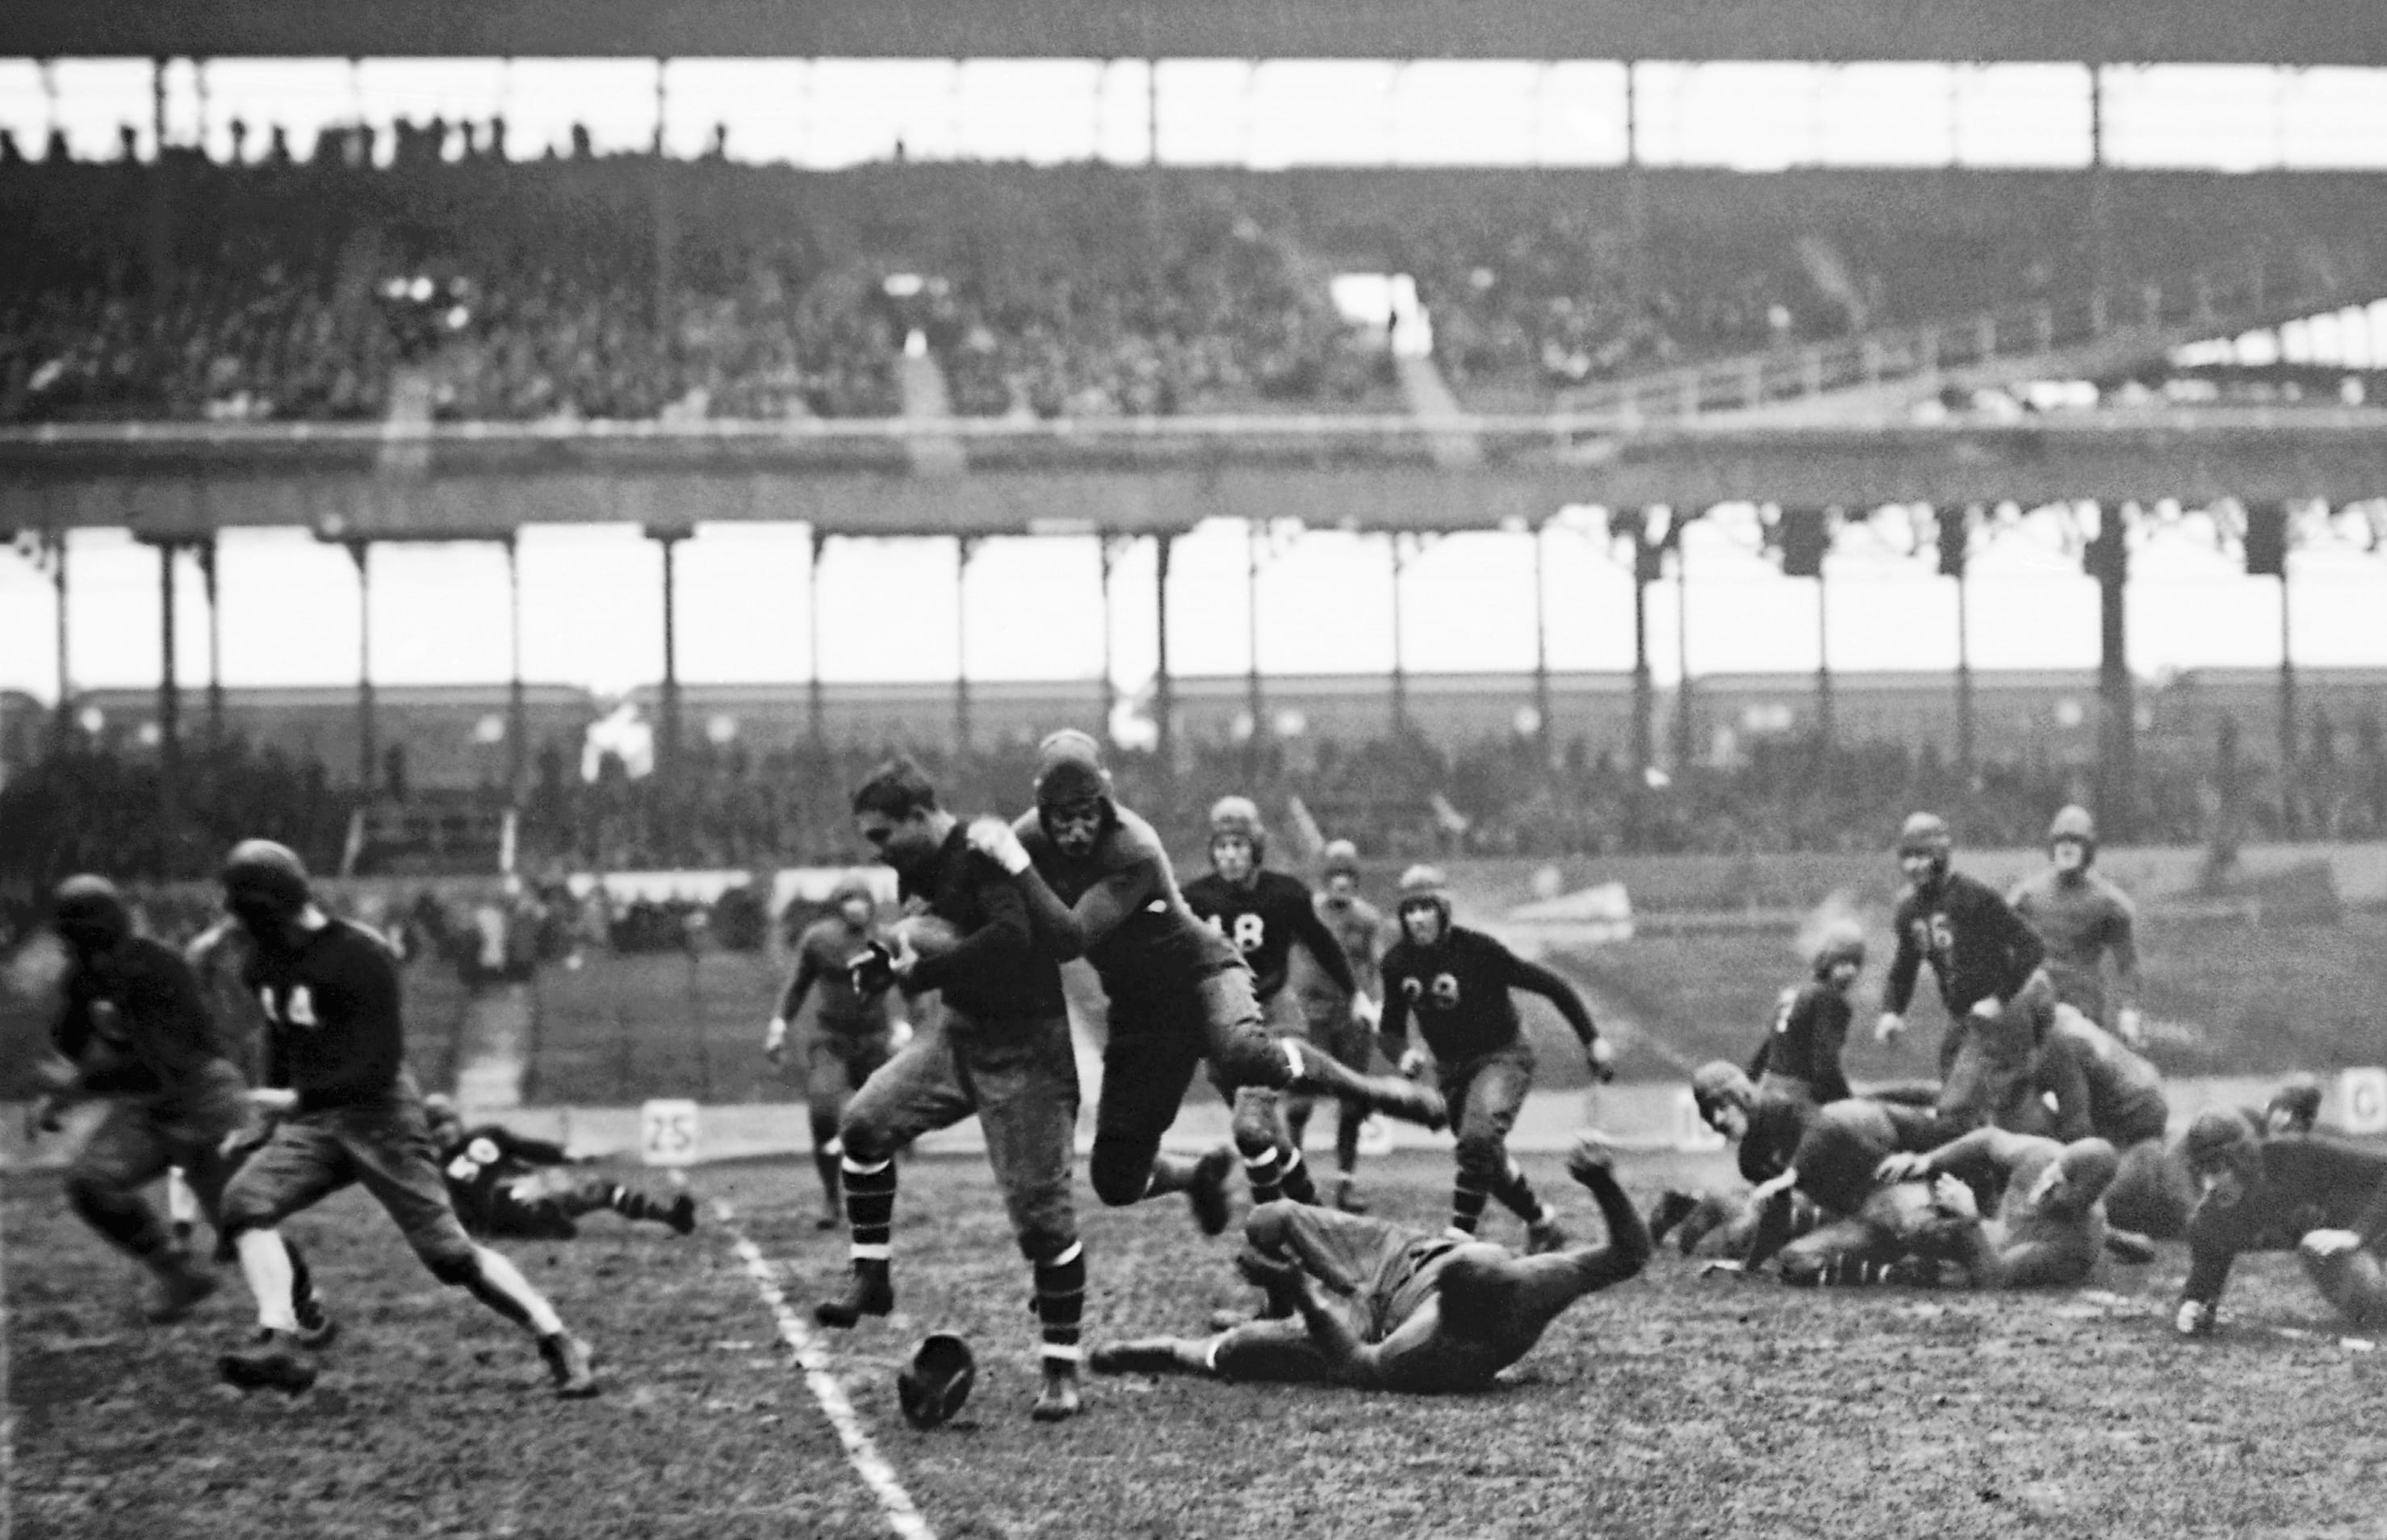 New York Giants and Green Bay Packers play at the Polo Grounds in New York in 1929.